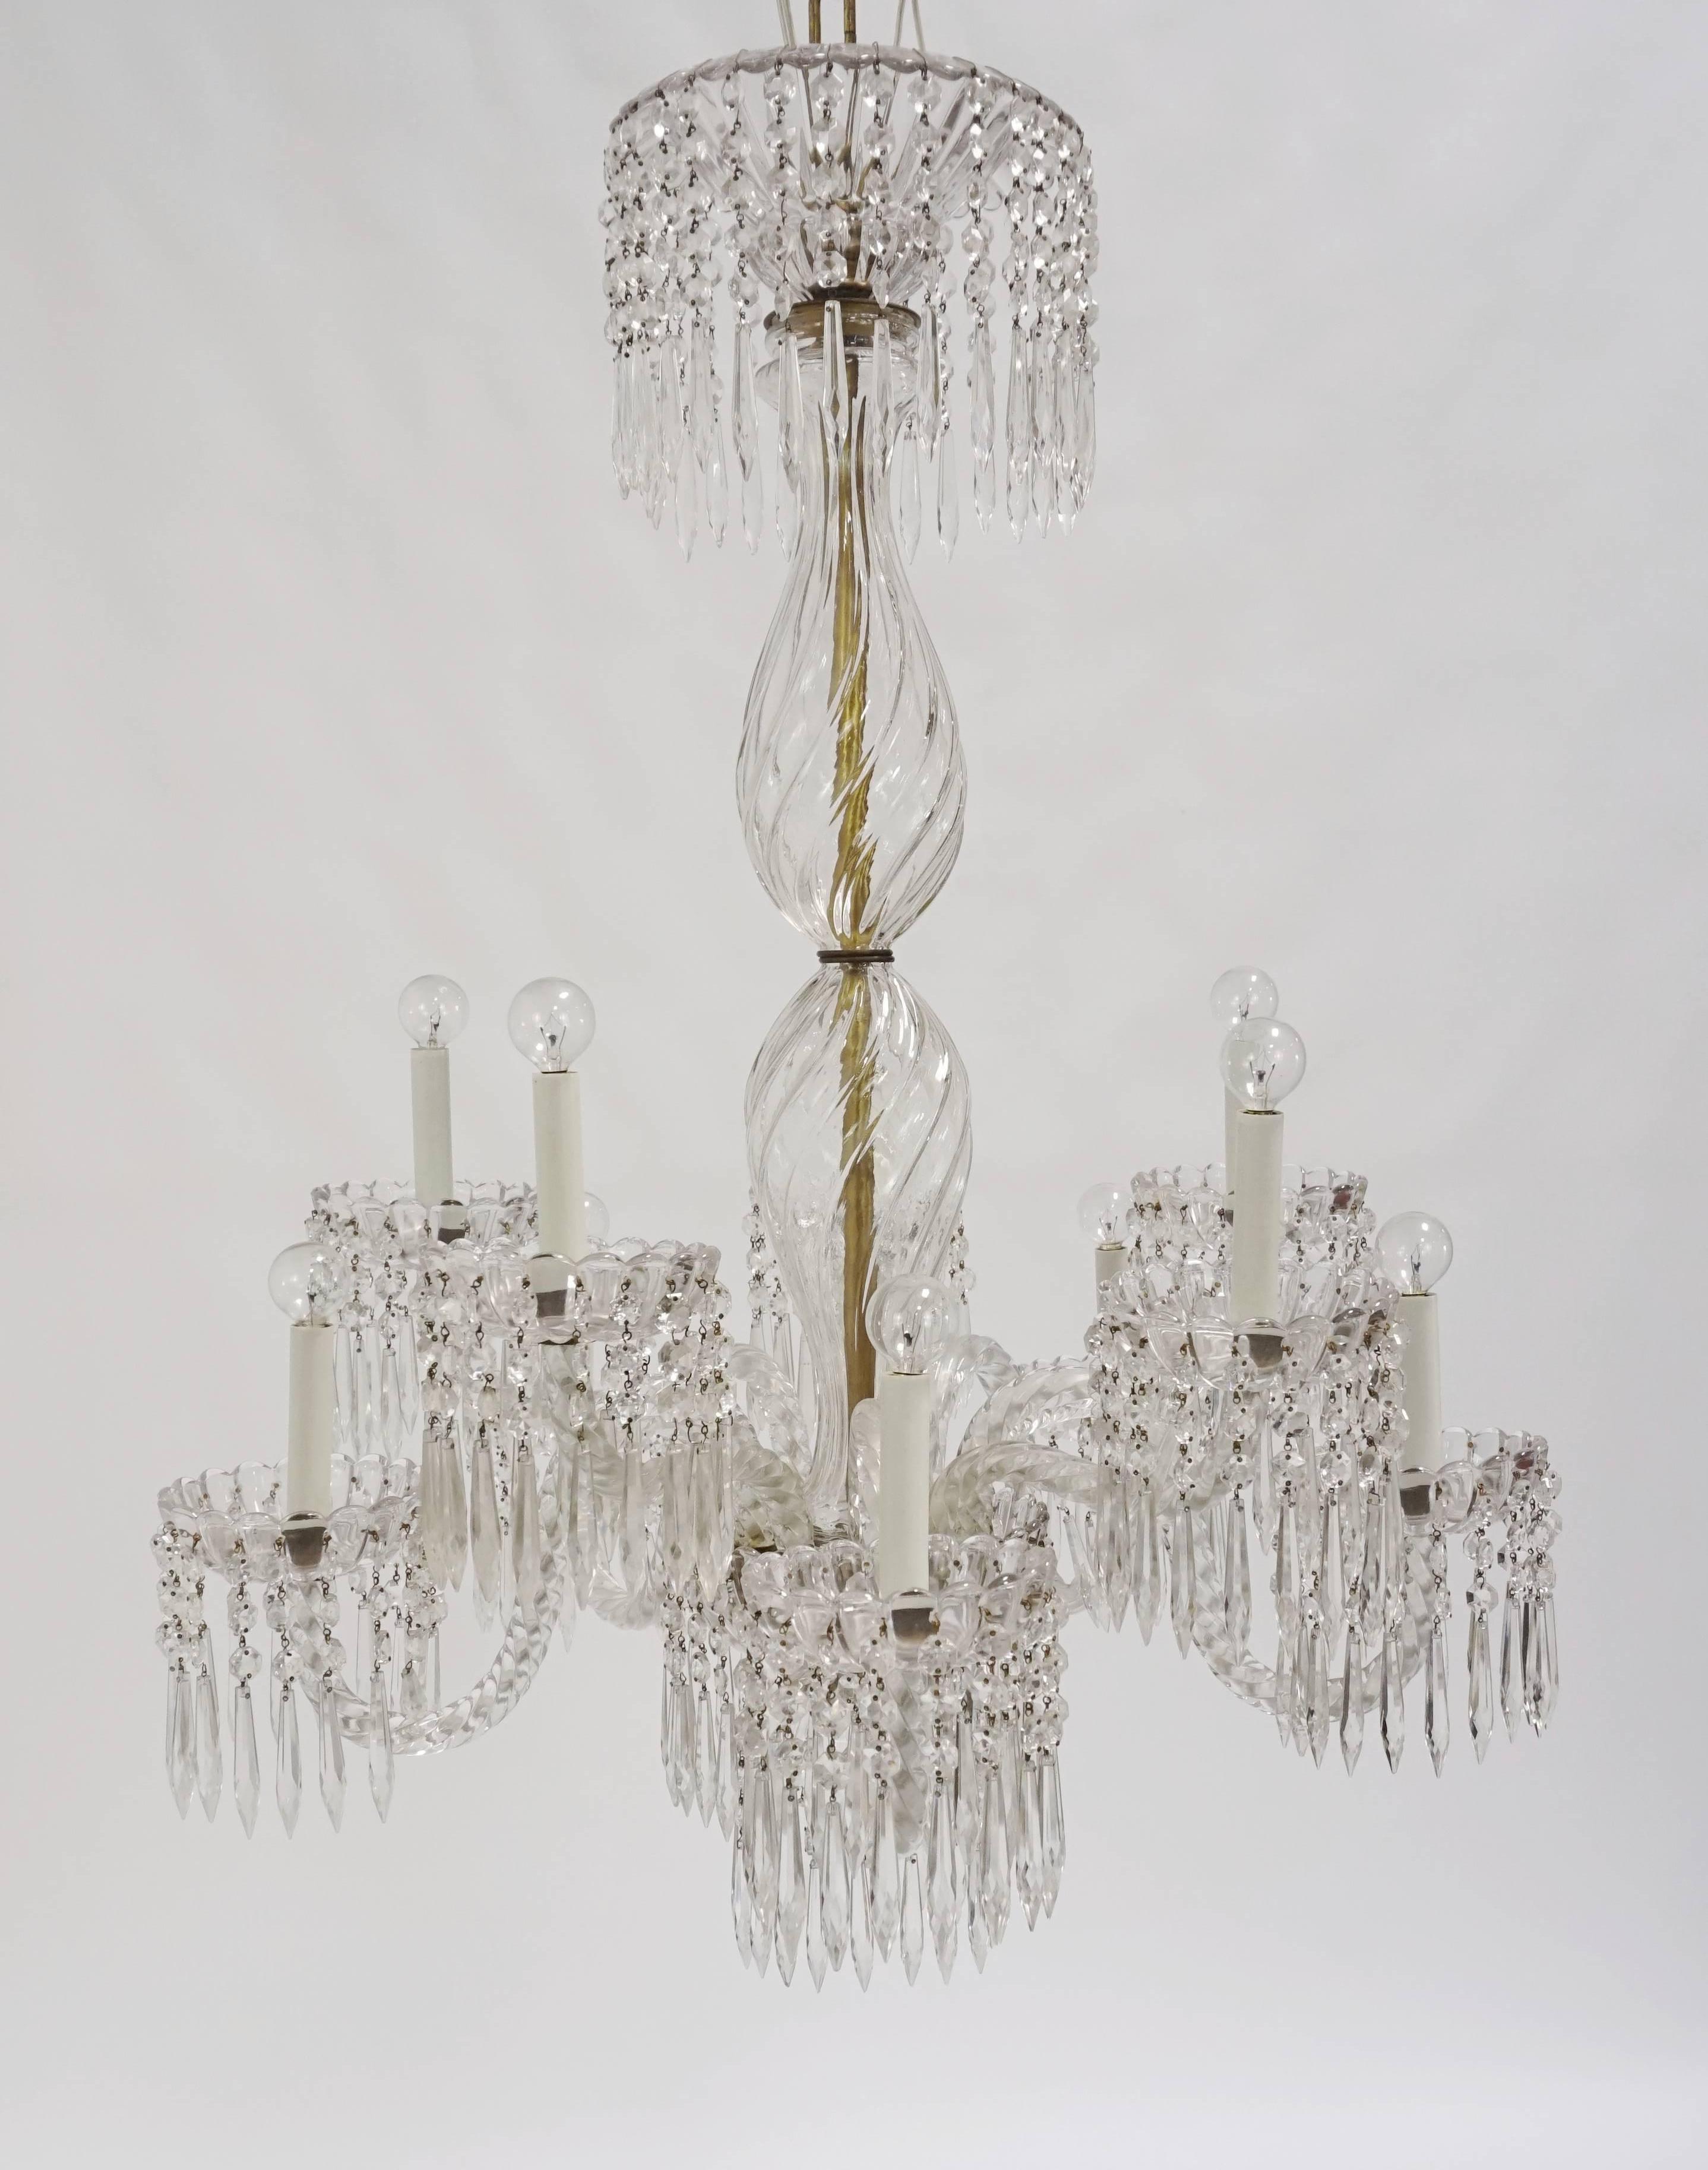 An exquisite, 1930's, French, 10-light chandelier; made of all glass and crystal undulating, rope arms, gadrooned bobeches, and column pieces; with and inner brass stem.  Octagon and spear crystals hang from the body dish and bobeches forming